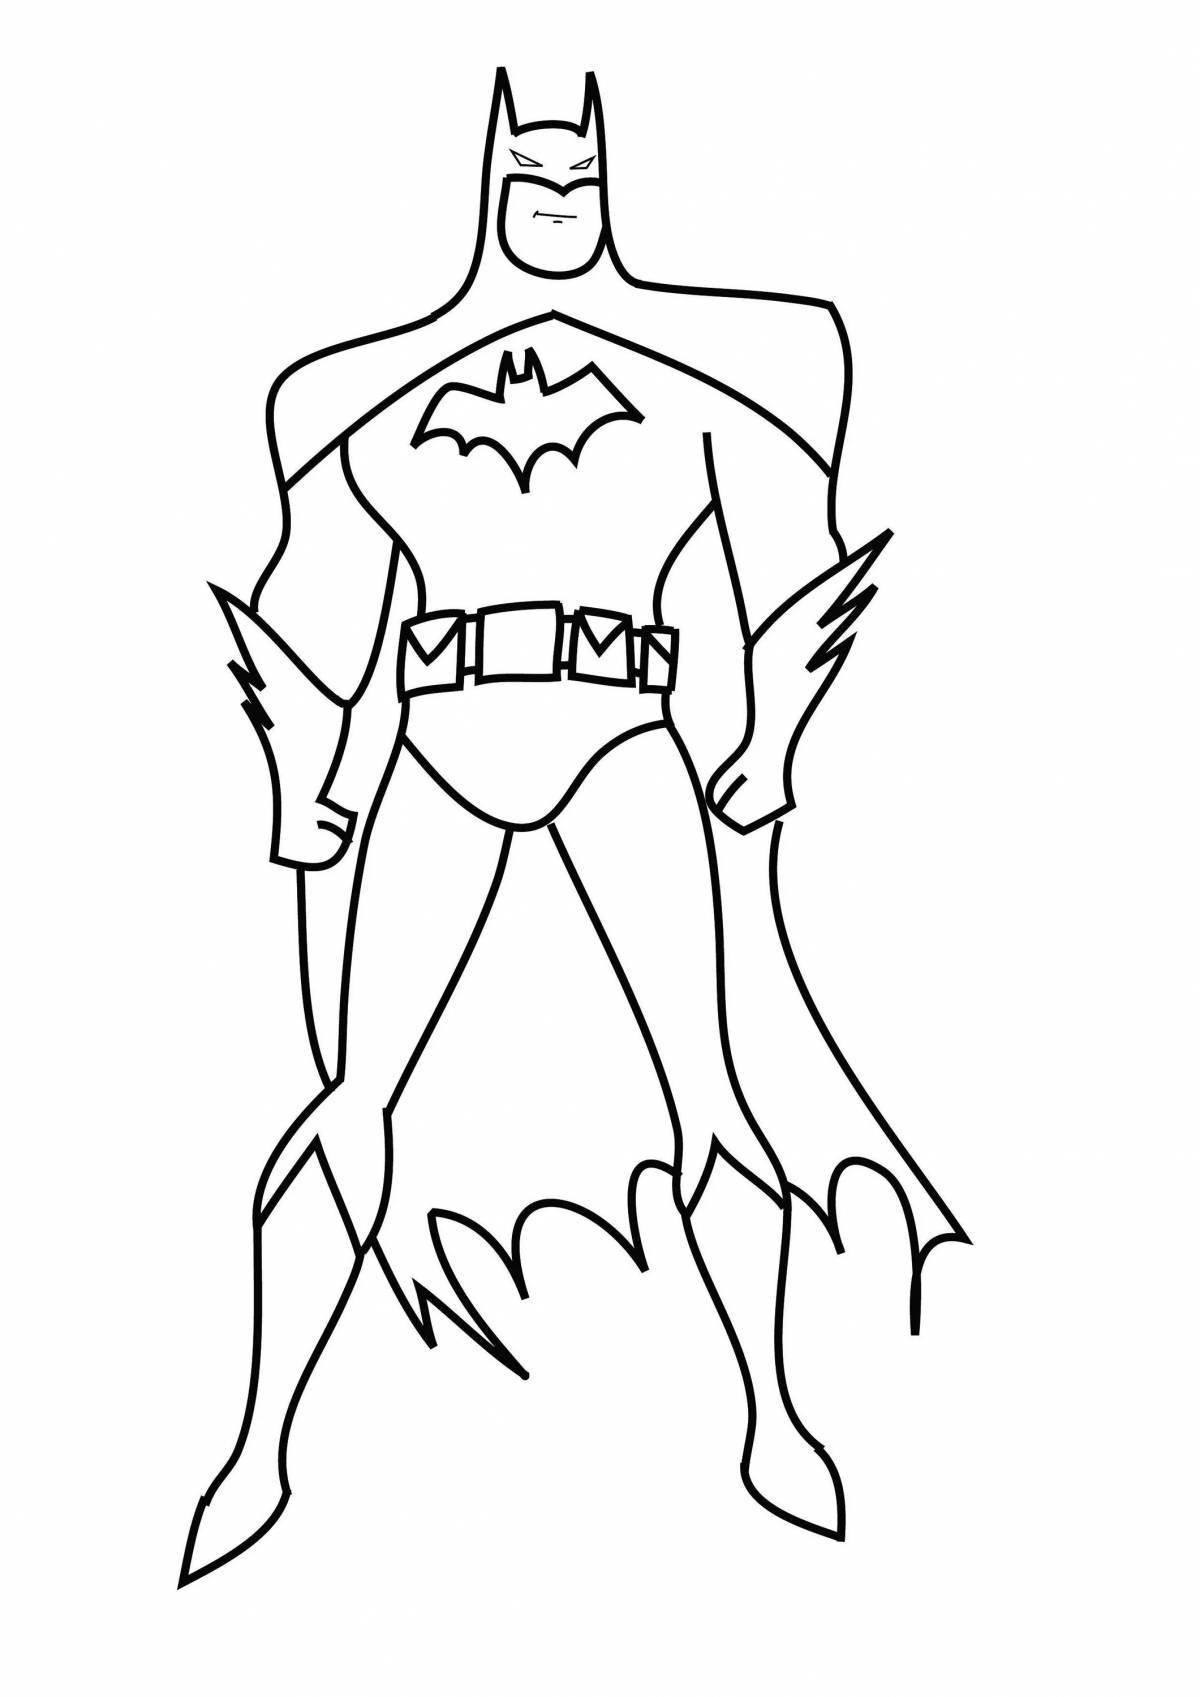 Unique superhero coloring book for 5 year old boys